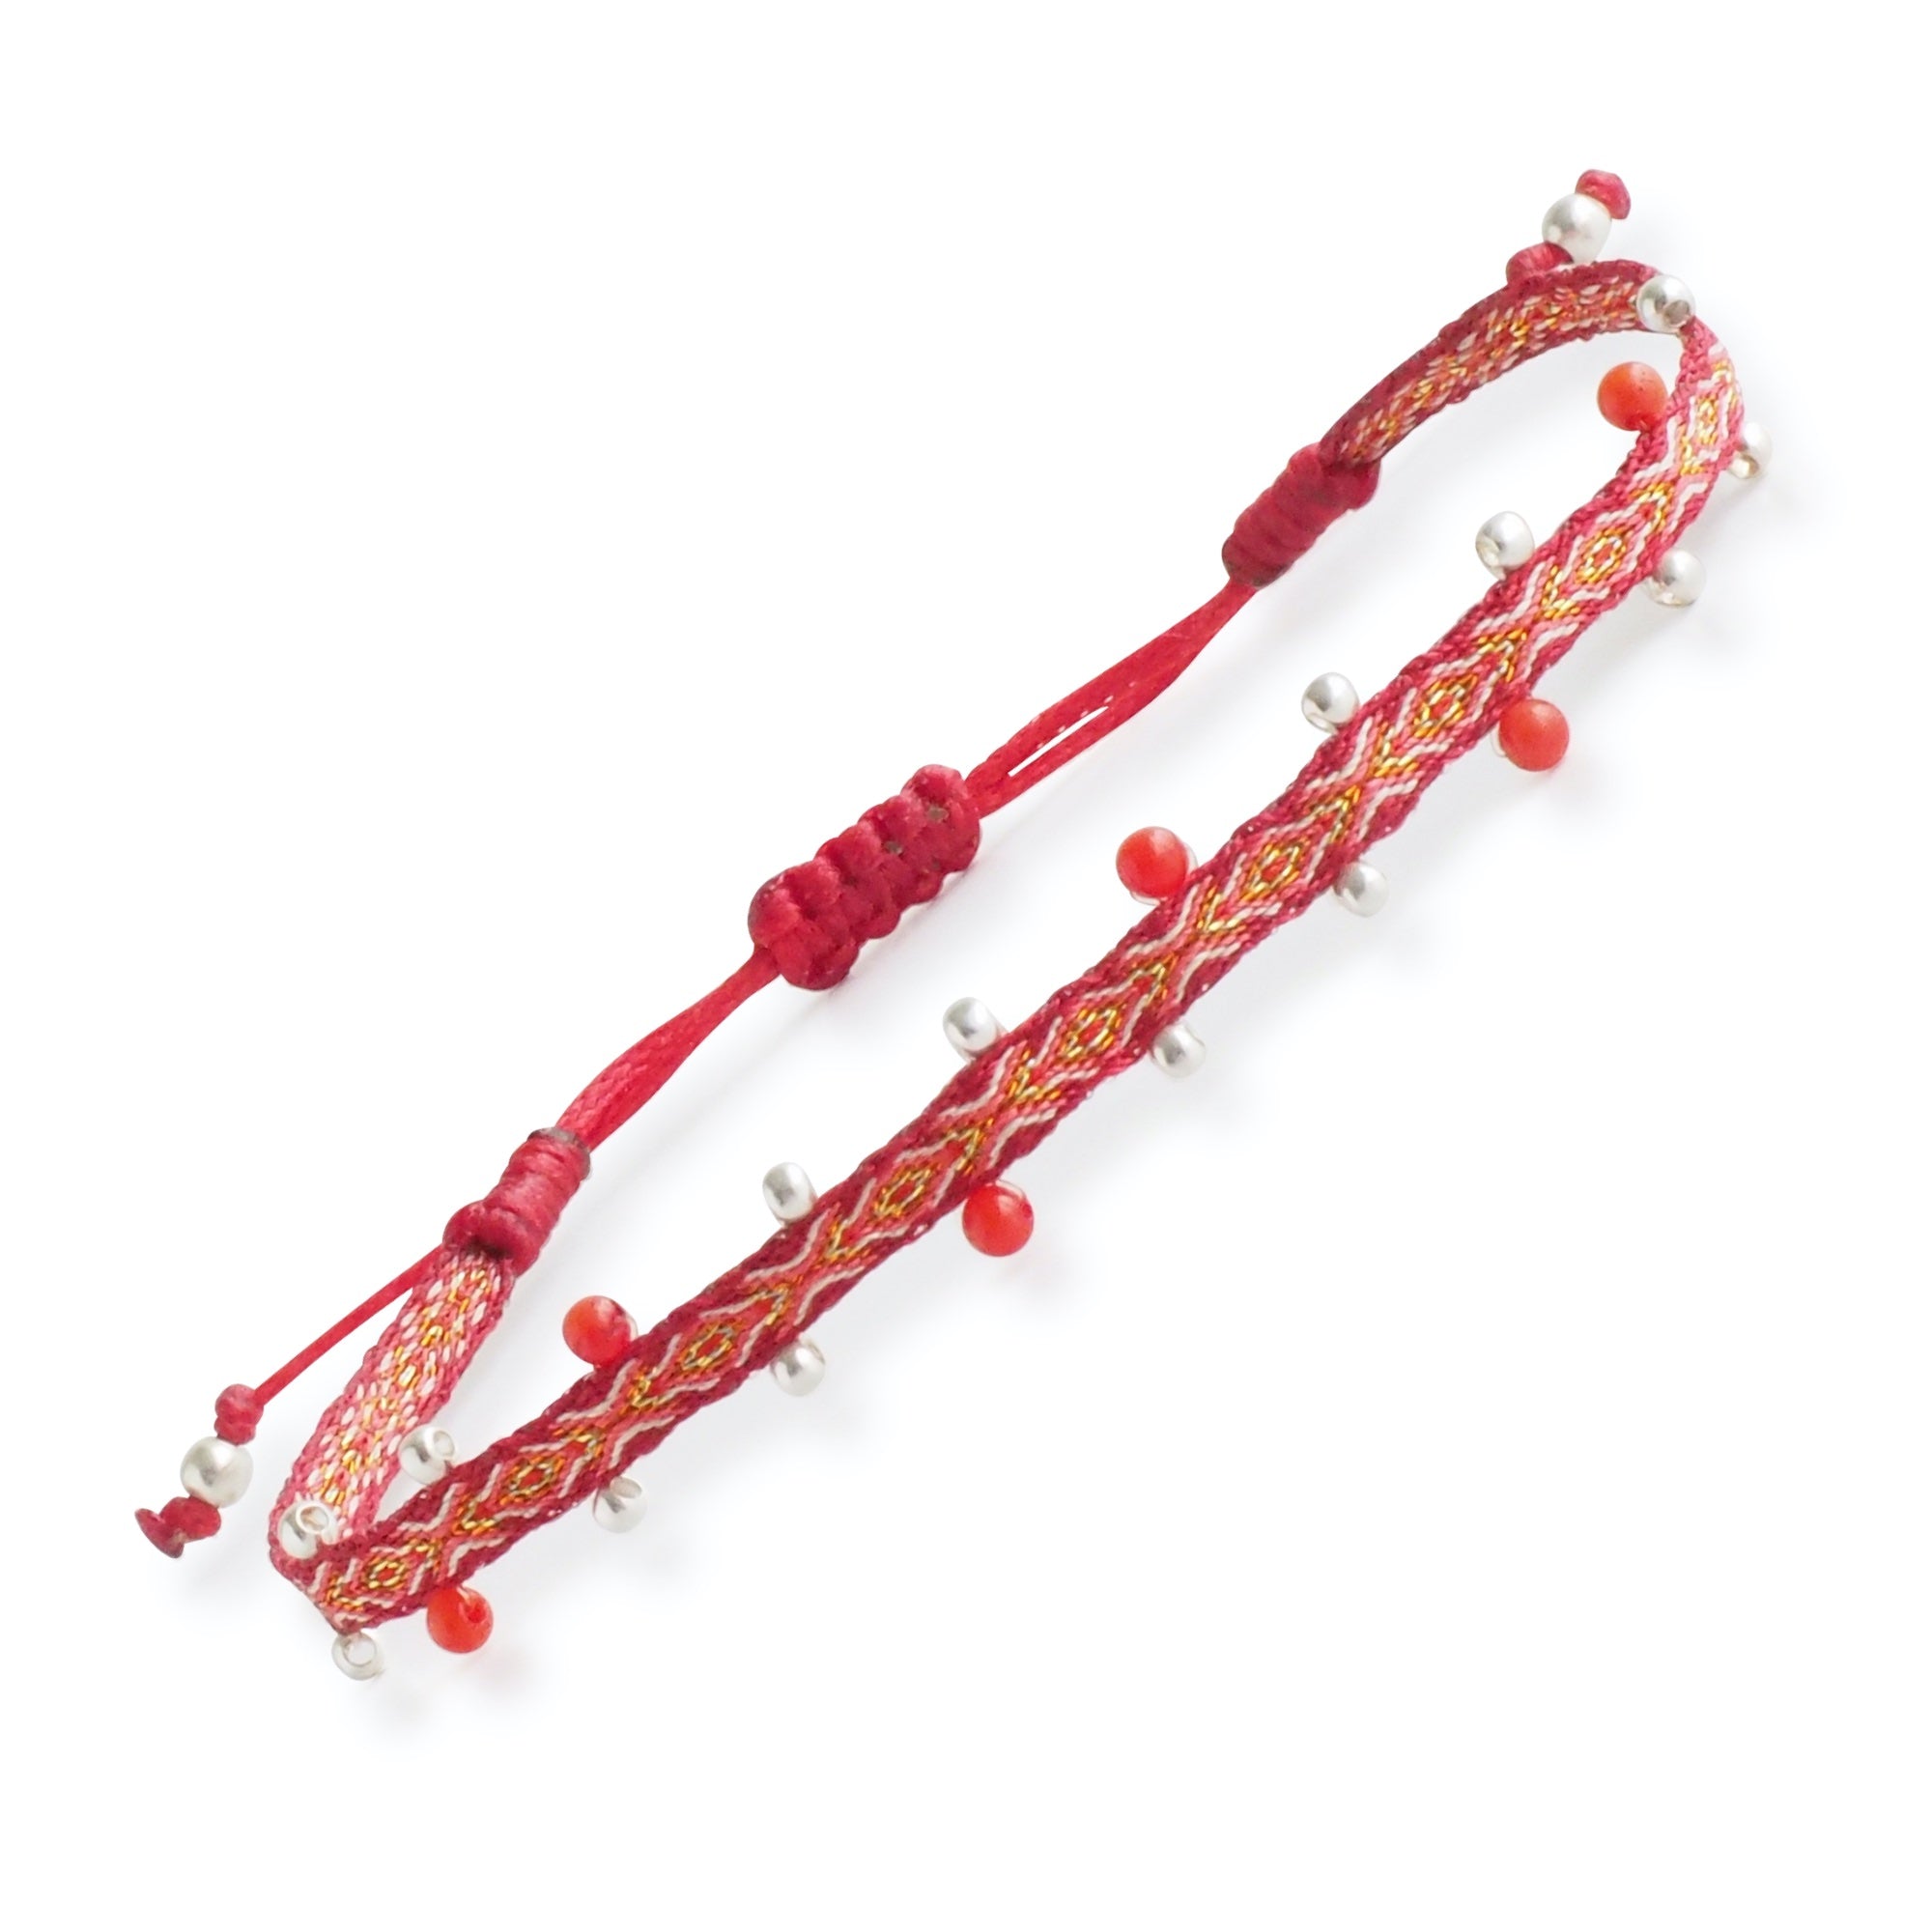 Egyptian Loom Bracelet Red Chakra Bracelet, with lateral sterling silver beads and coral gemstones, 40 threads bracelet